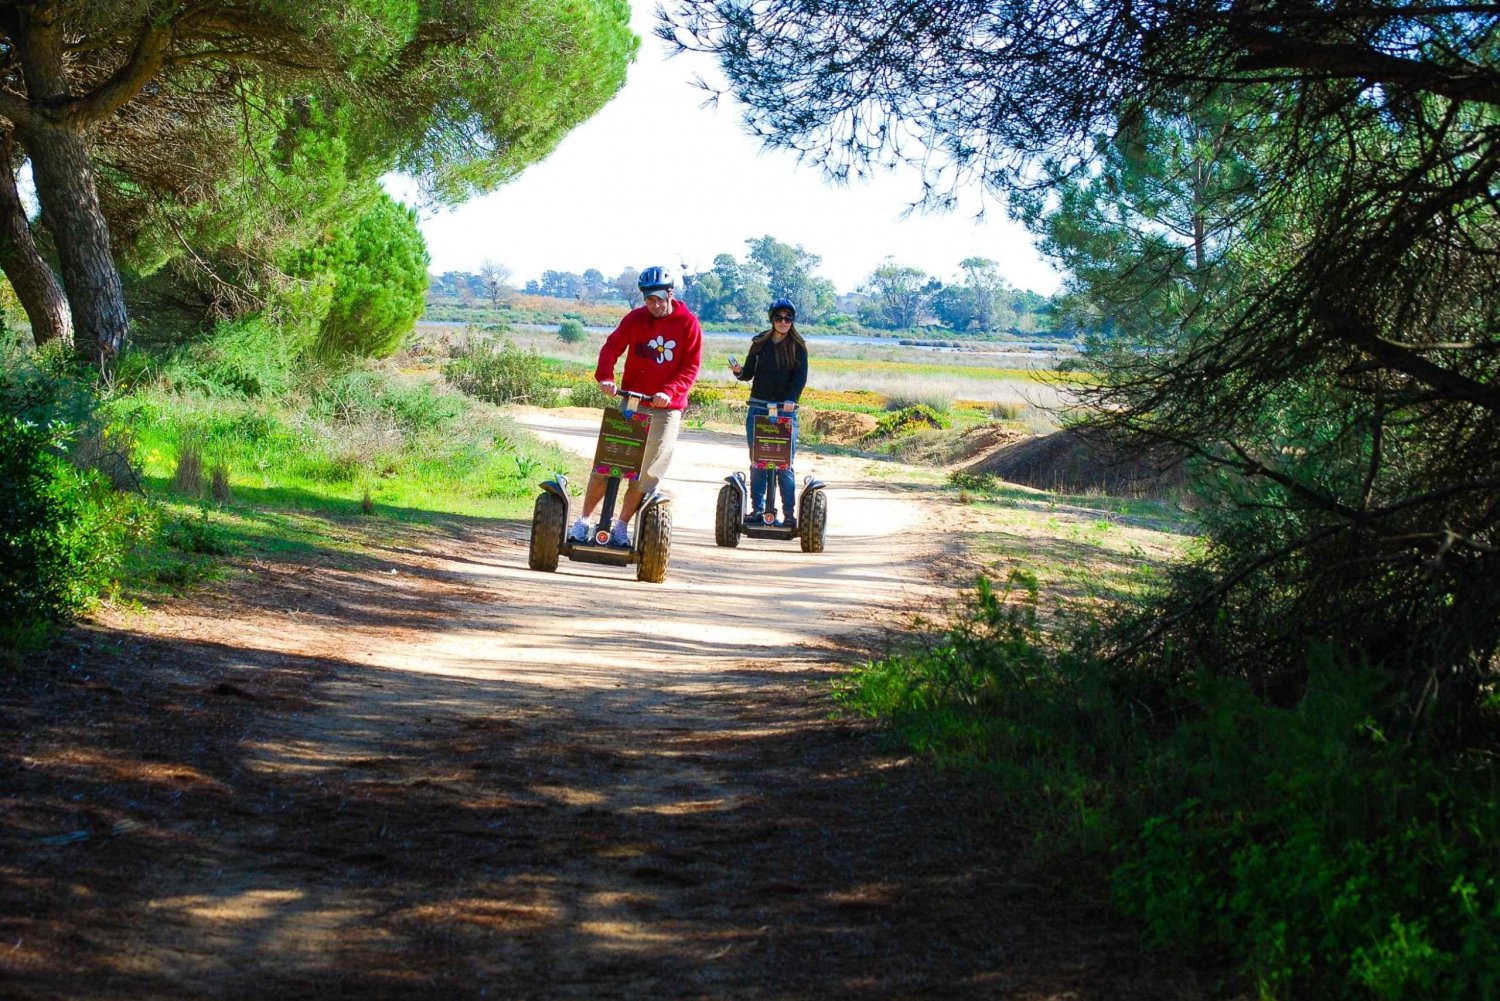 Ria Formosa National Park Segway Tour & Seafood Lunch